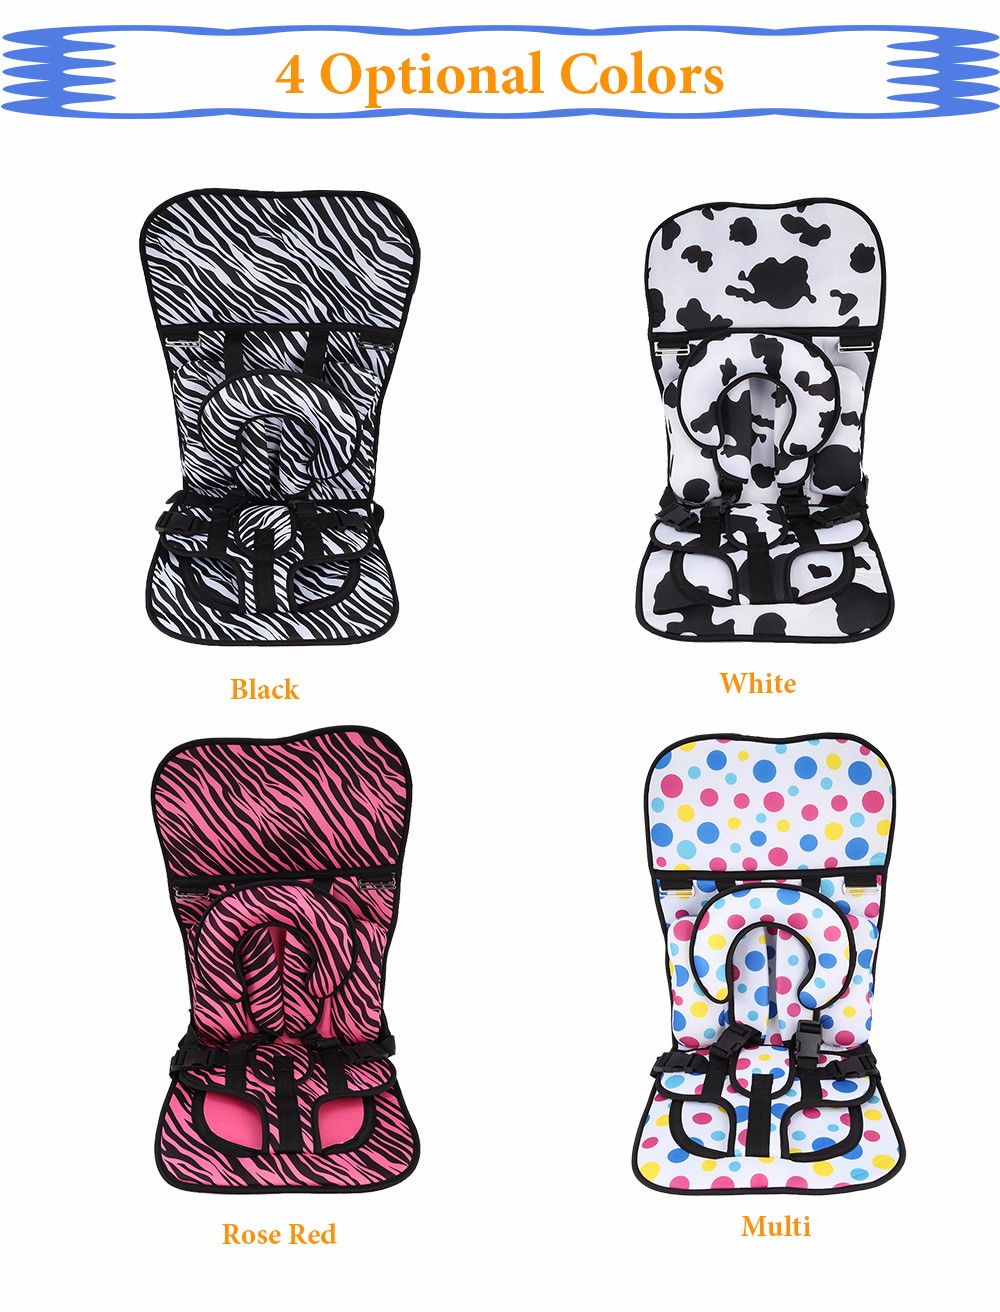 Portable Baby Kids Safety Car Seat Children Harness Pad Cushion